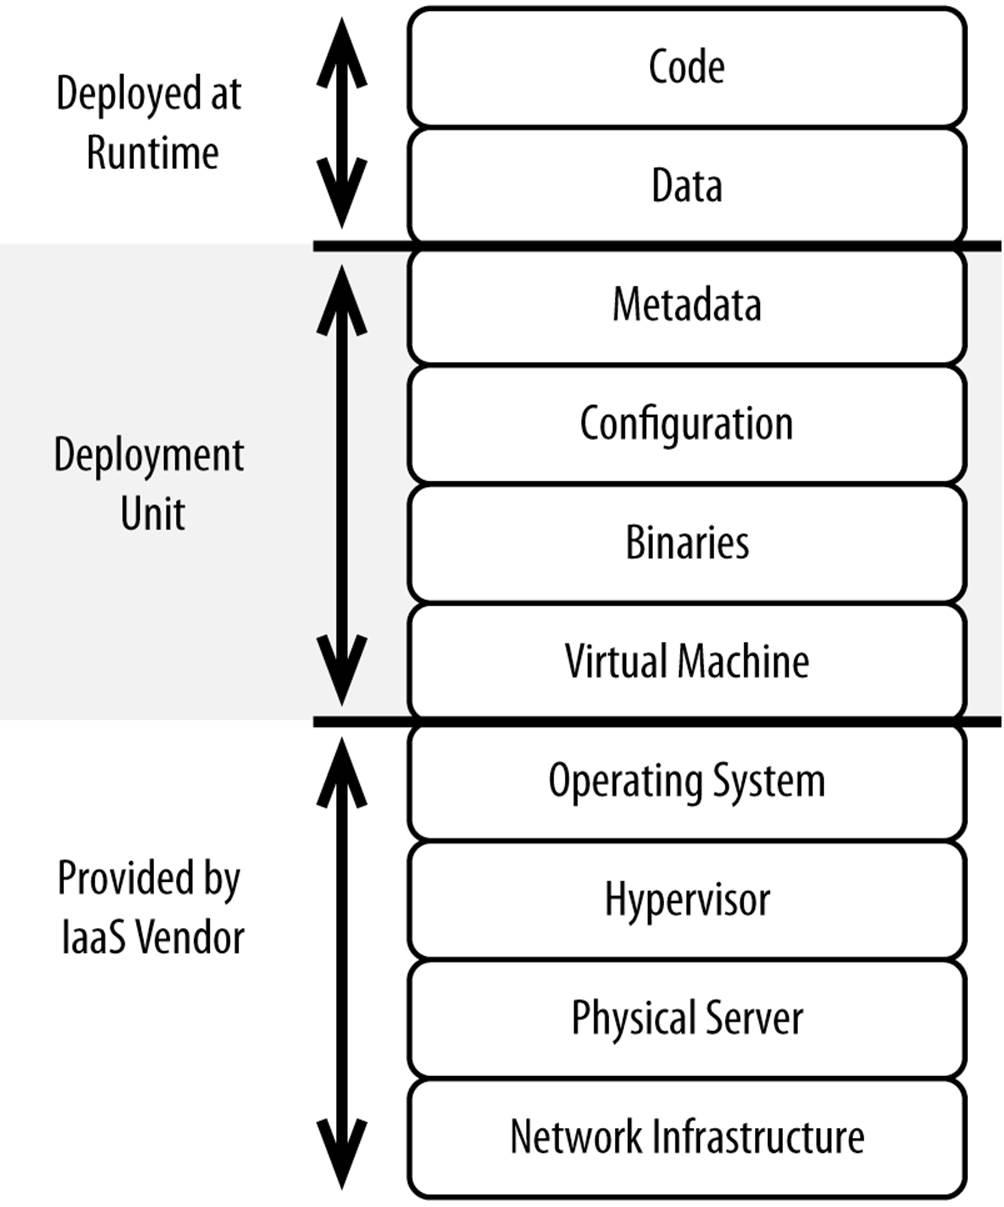 Scope of a deployment unit